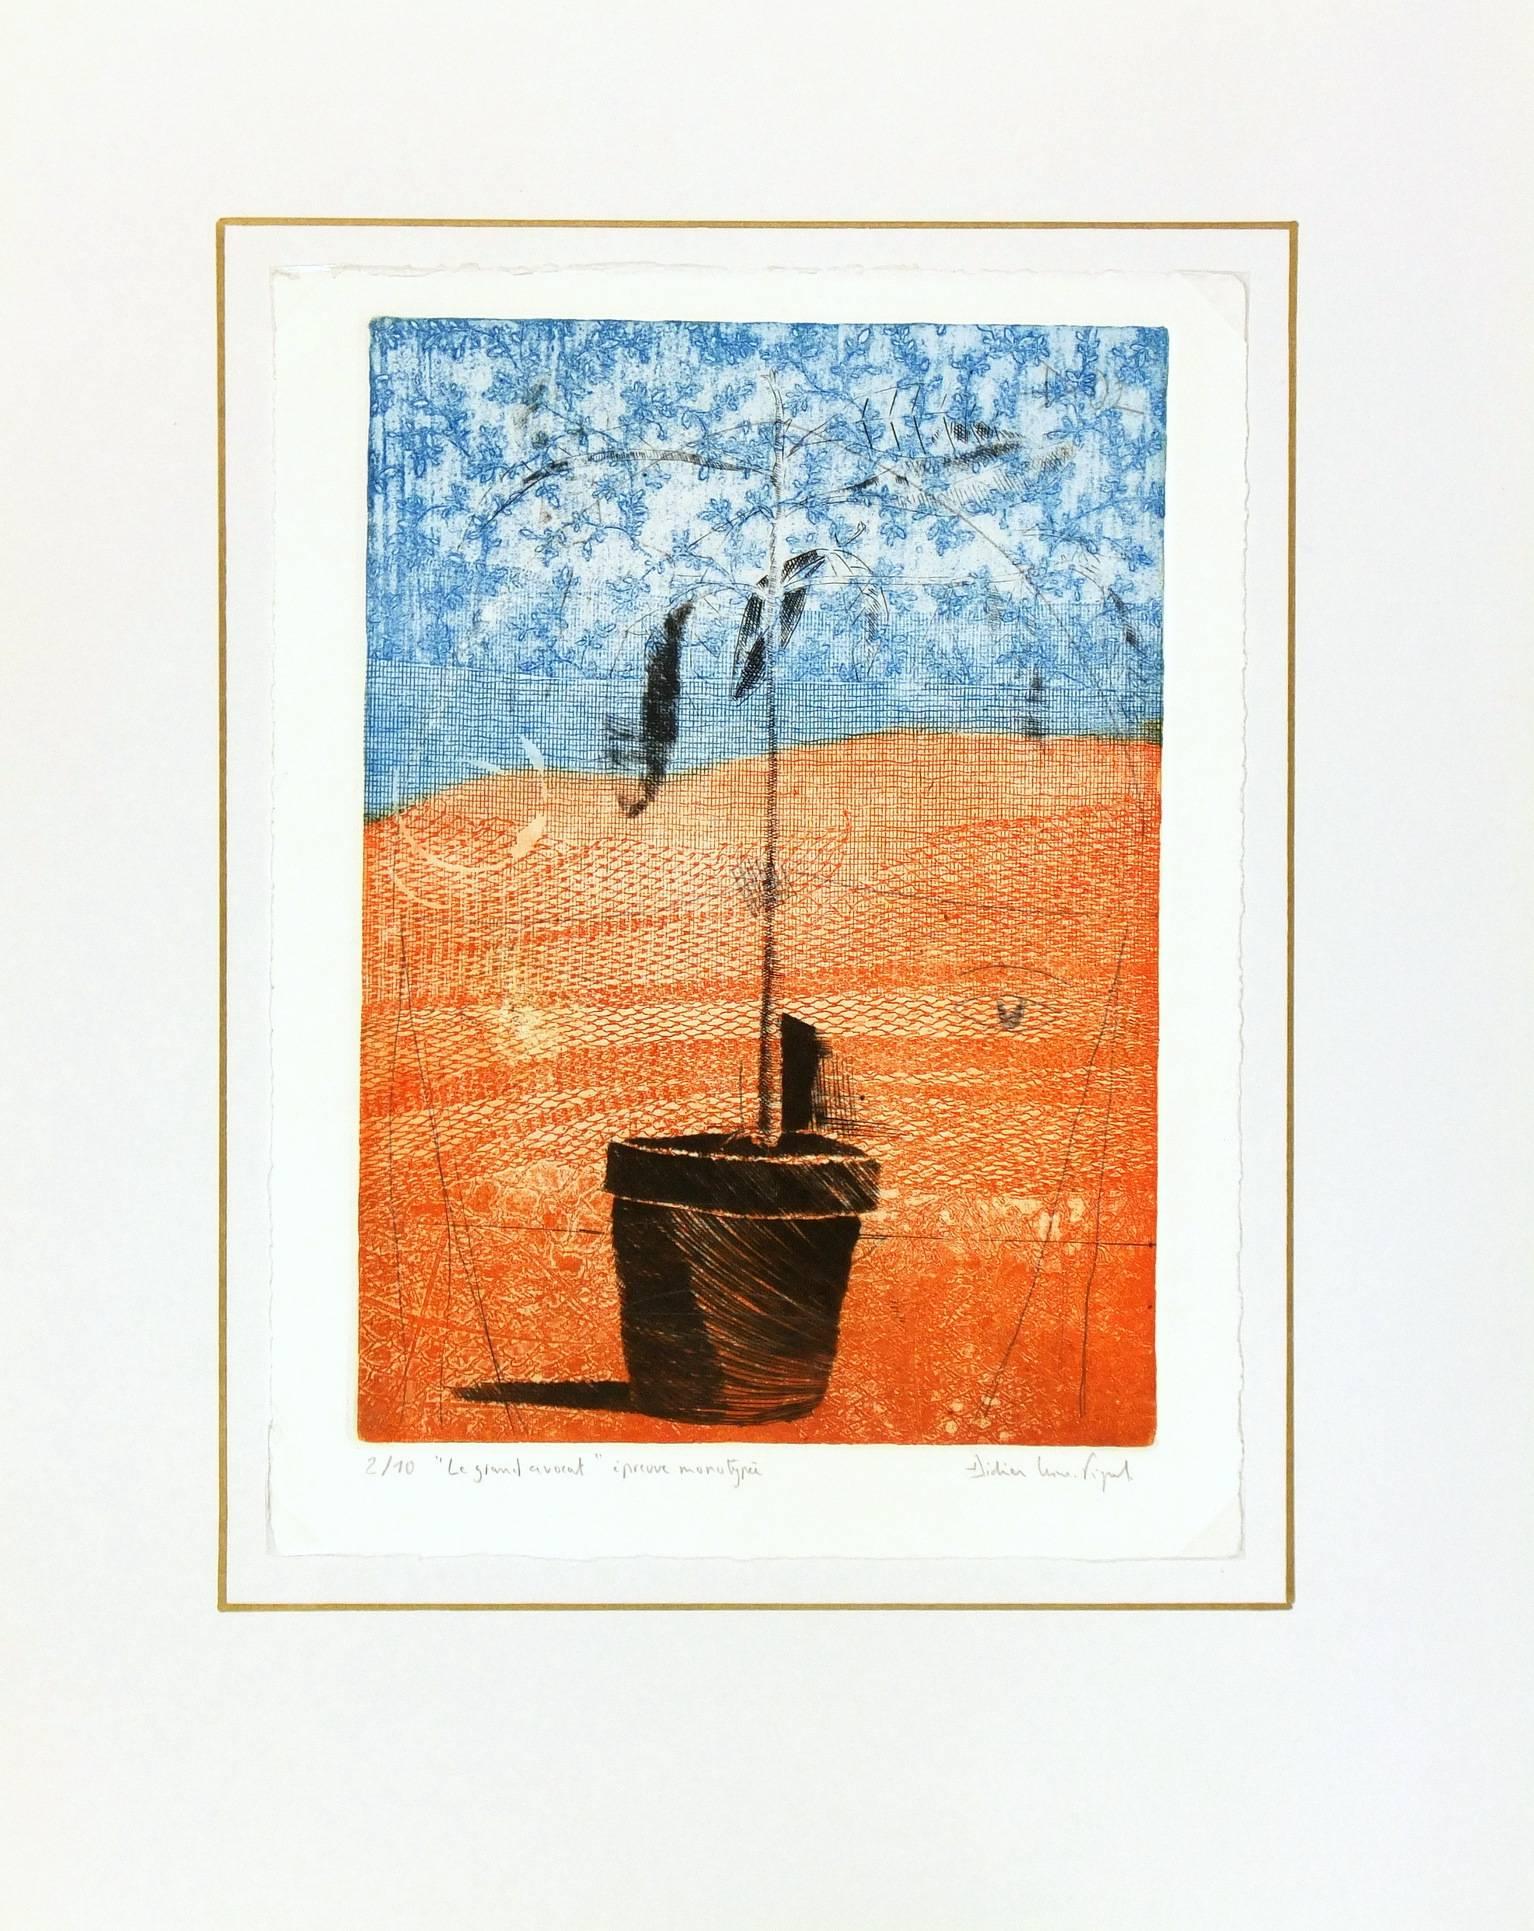 Vivid French aquatint of a potted plant layered with an abstract face by Didier Lesne-Pigeaud, 2003. Signed lower right, titled and numbered 2 of 10 lower left. Titled: Le Grand Avocat. The title is a play on the words mingling the concepts of a